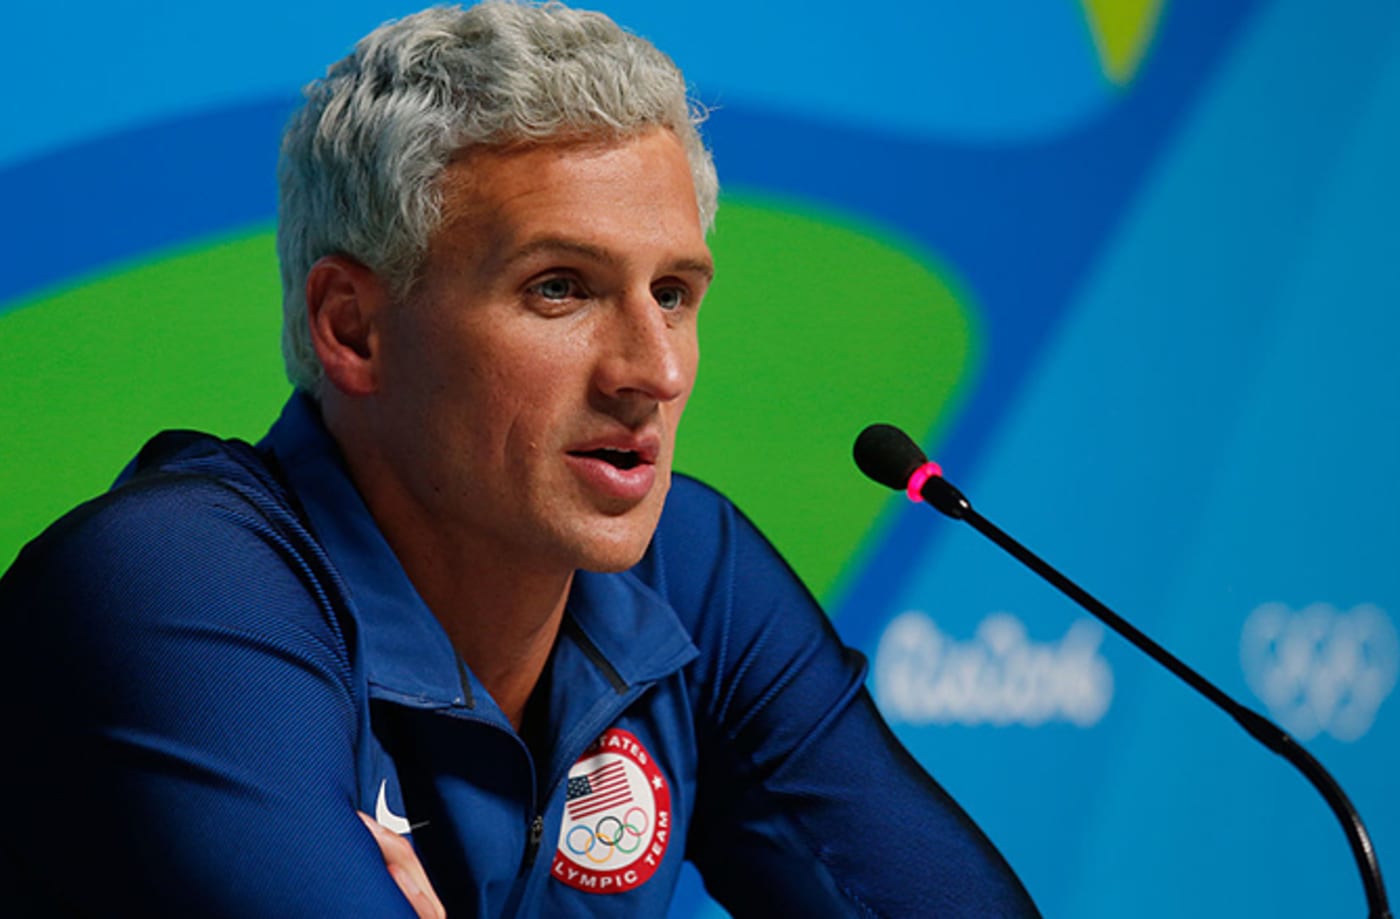 This is a Ryan Lochte at a press conference.